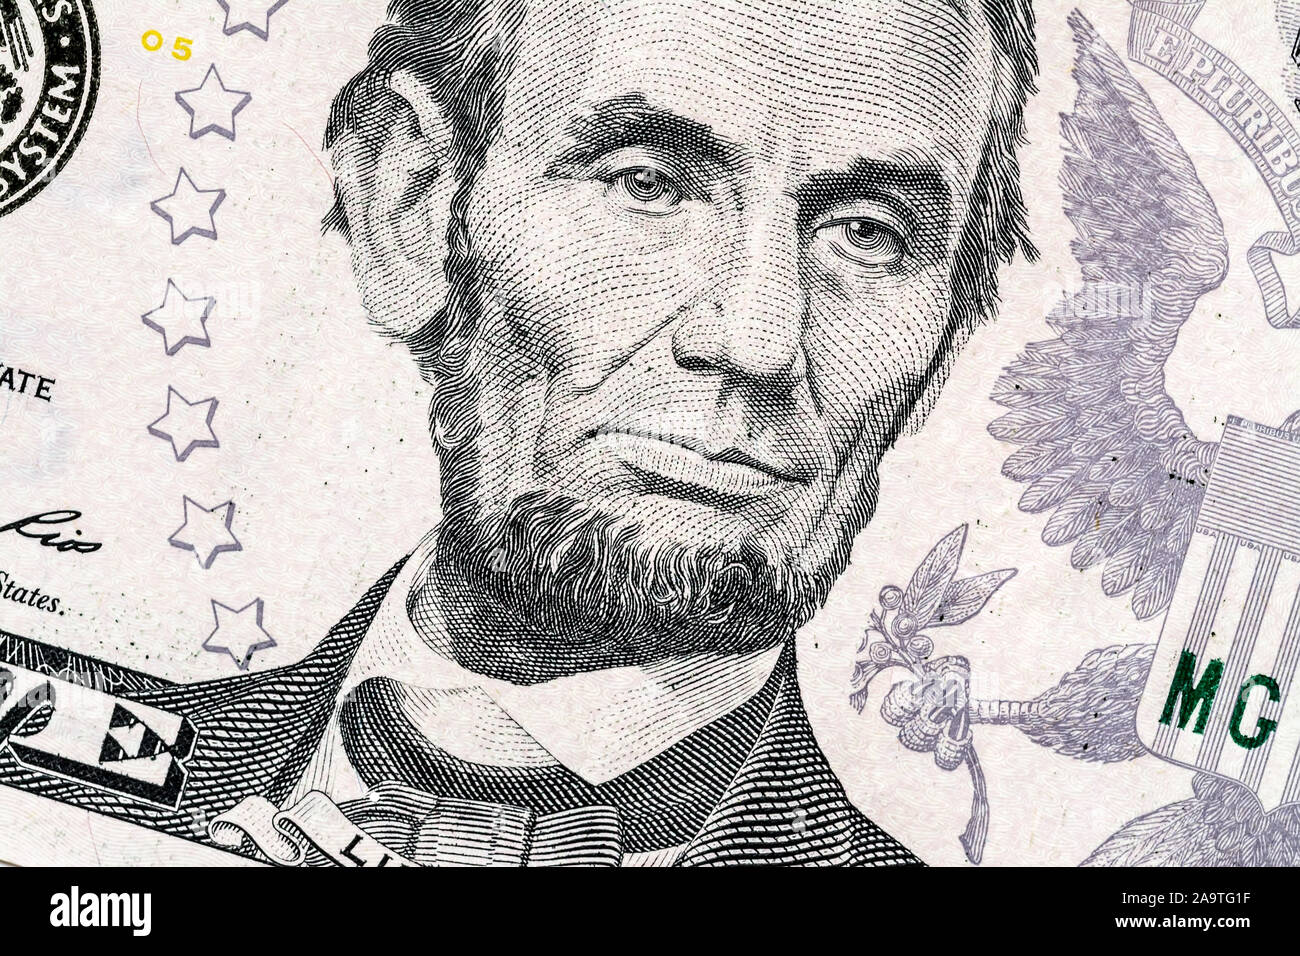 Close-up portrait of Abraham Lincoln on a 5 US dollars banknote. Stock Photo